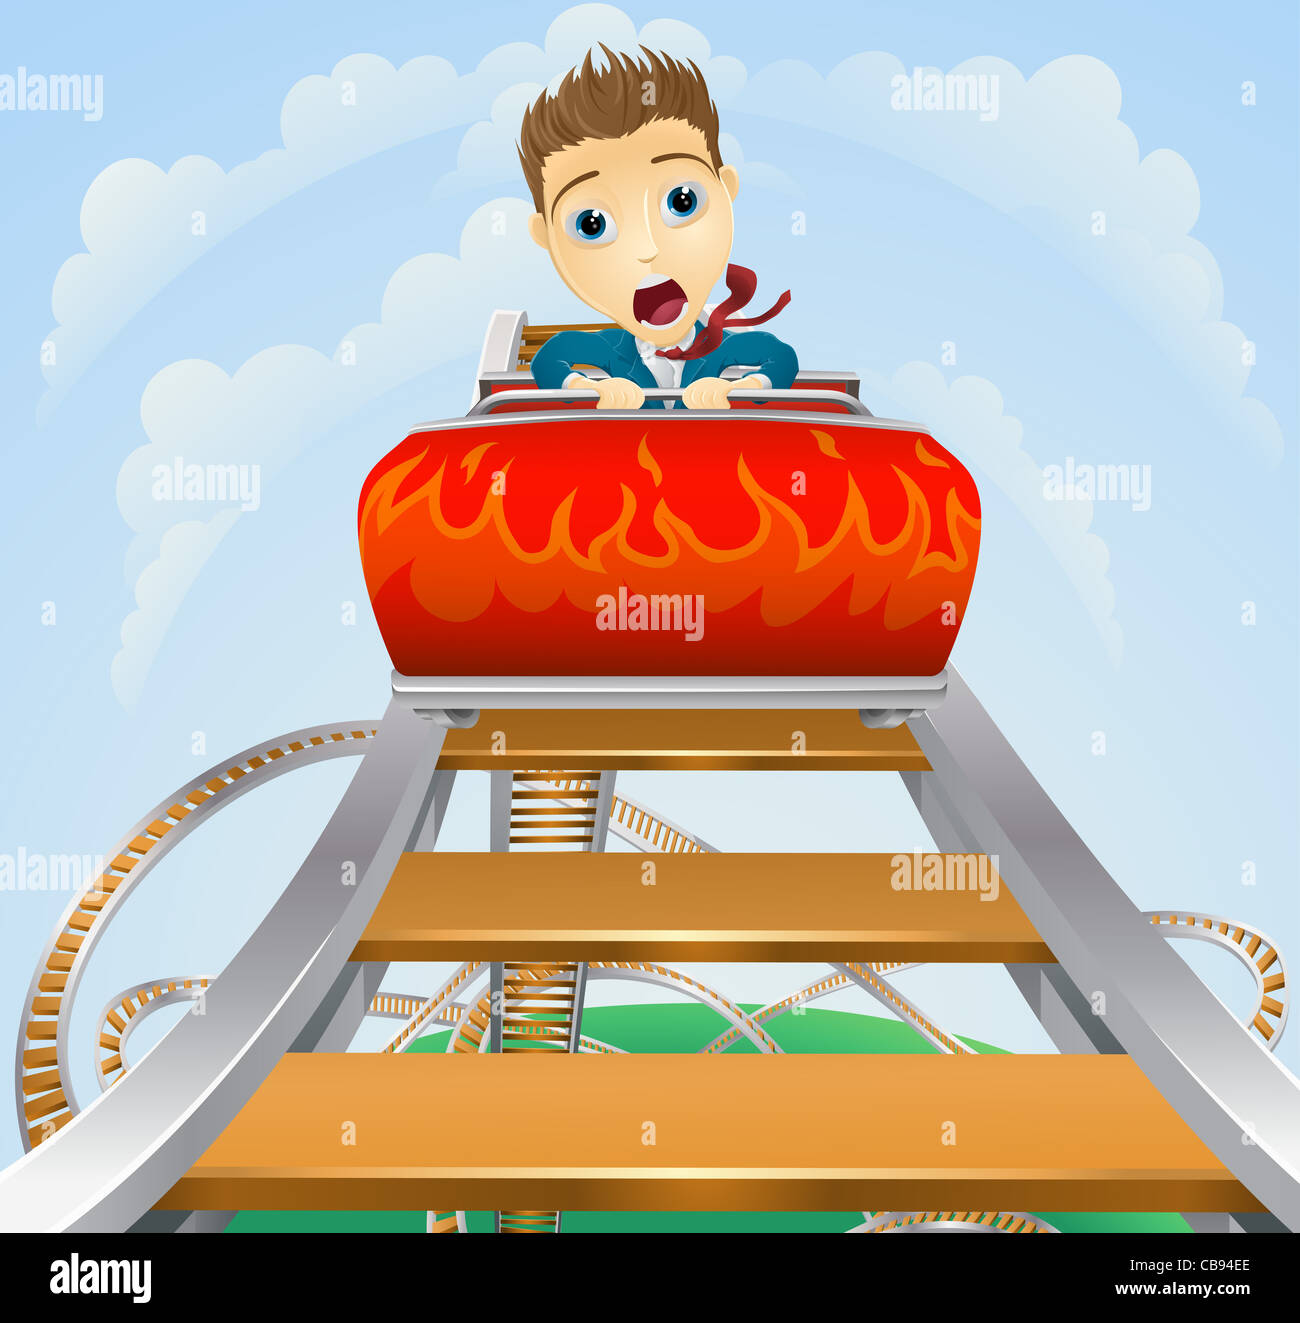 Illustration of a business man looking very scared on a roller coaster Stock Photo